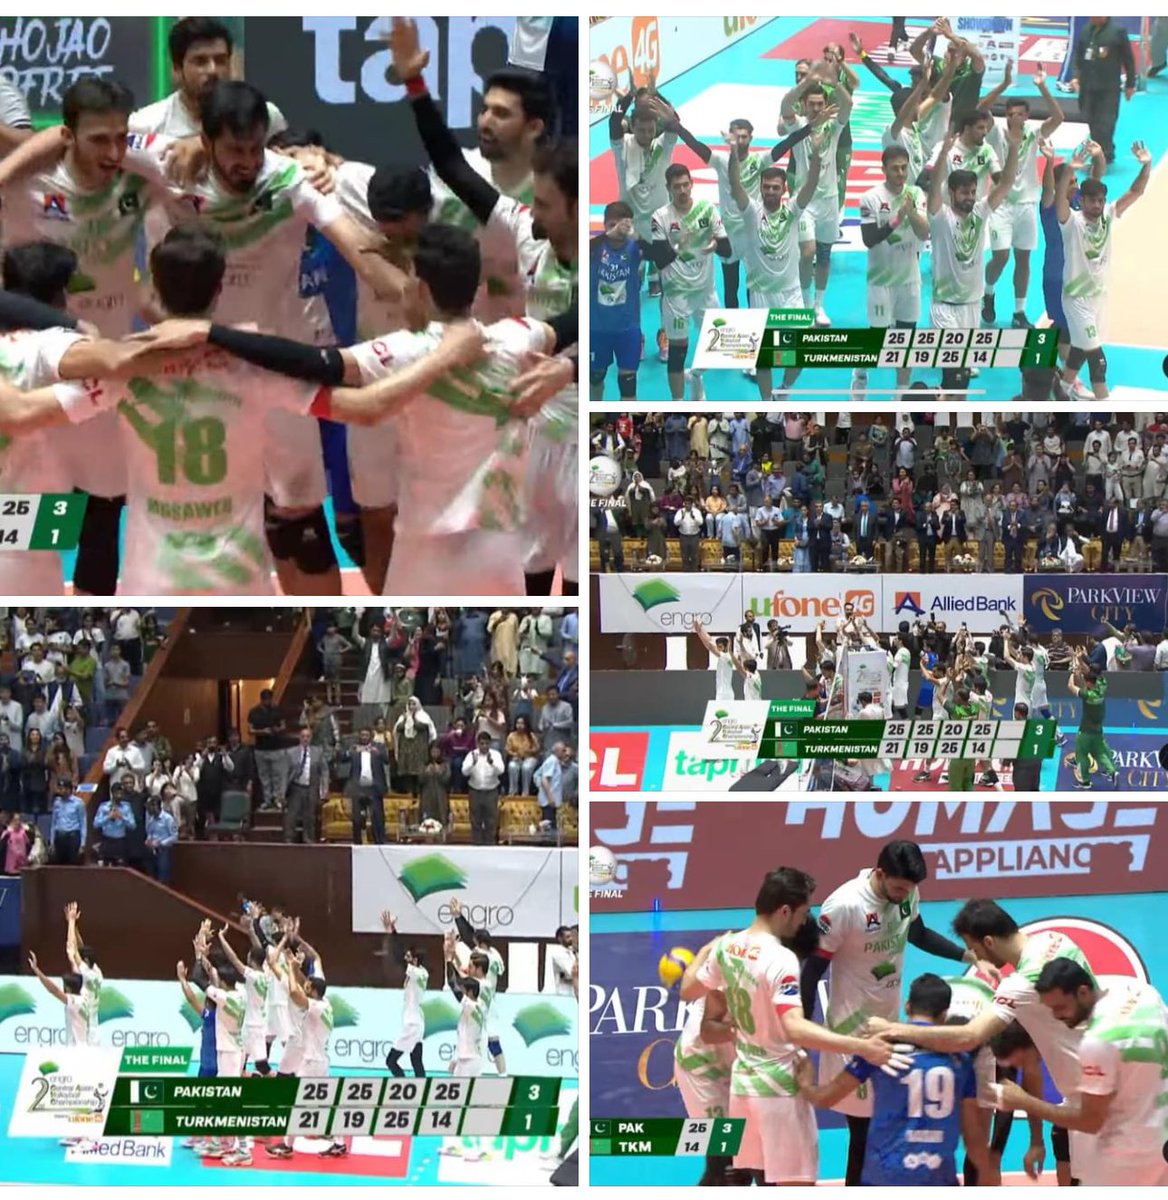 Alhumdullilah! Pakistan are the Champions of Central Asian Volleyball Championship. Pak won the final 3-1 against Turkeministan.